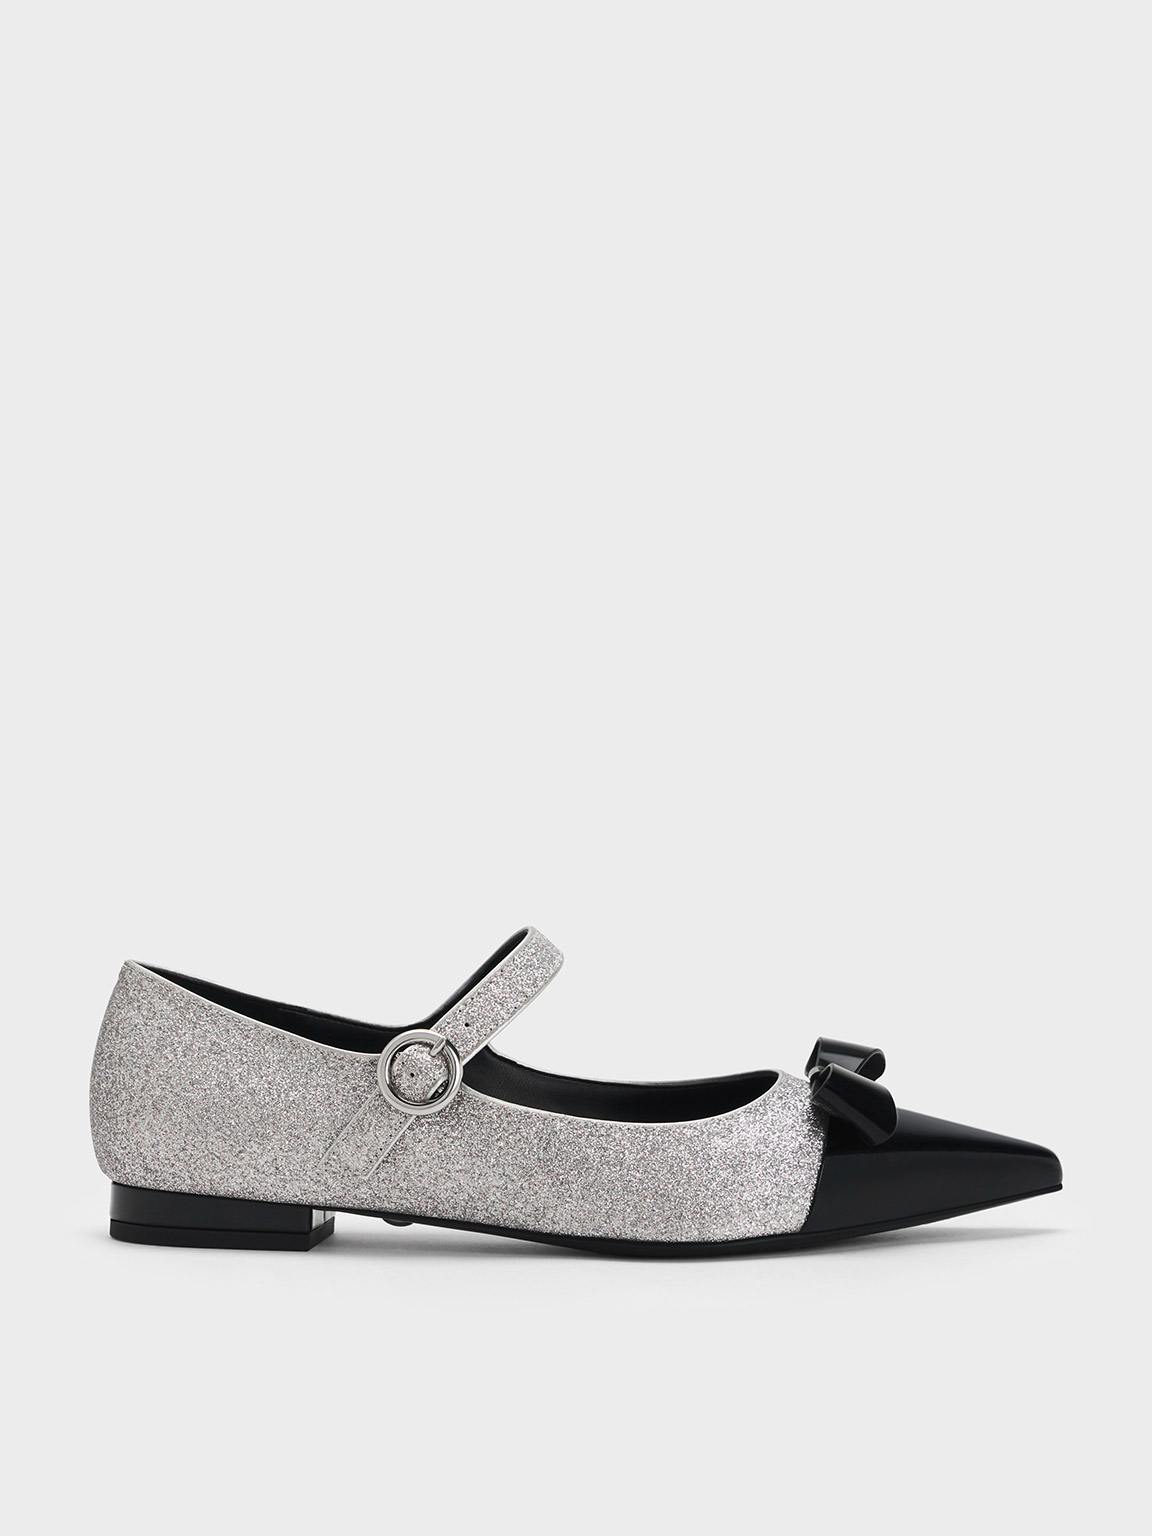 Charles & Keith Leather Glittered Bow Mary Jane Flats In Silver